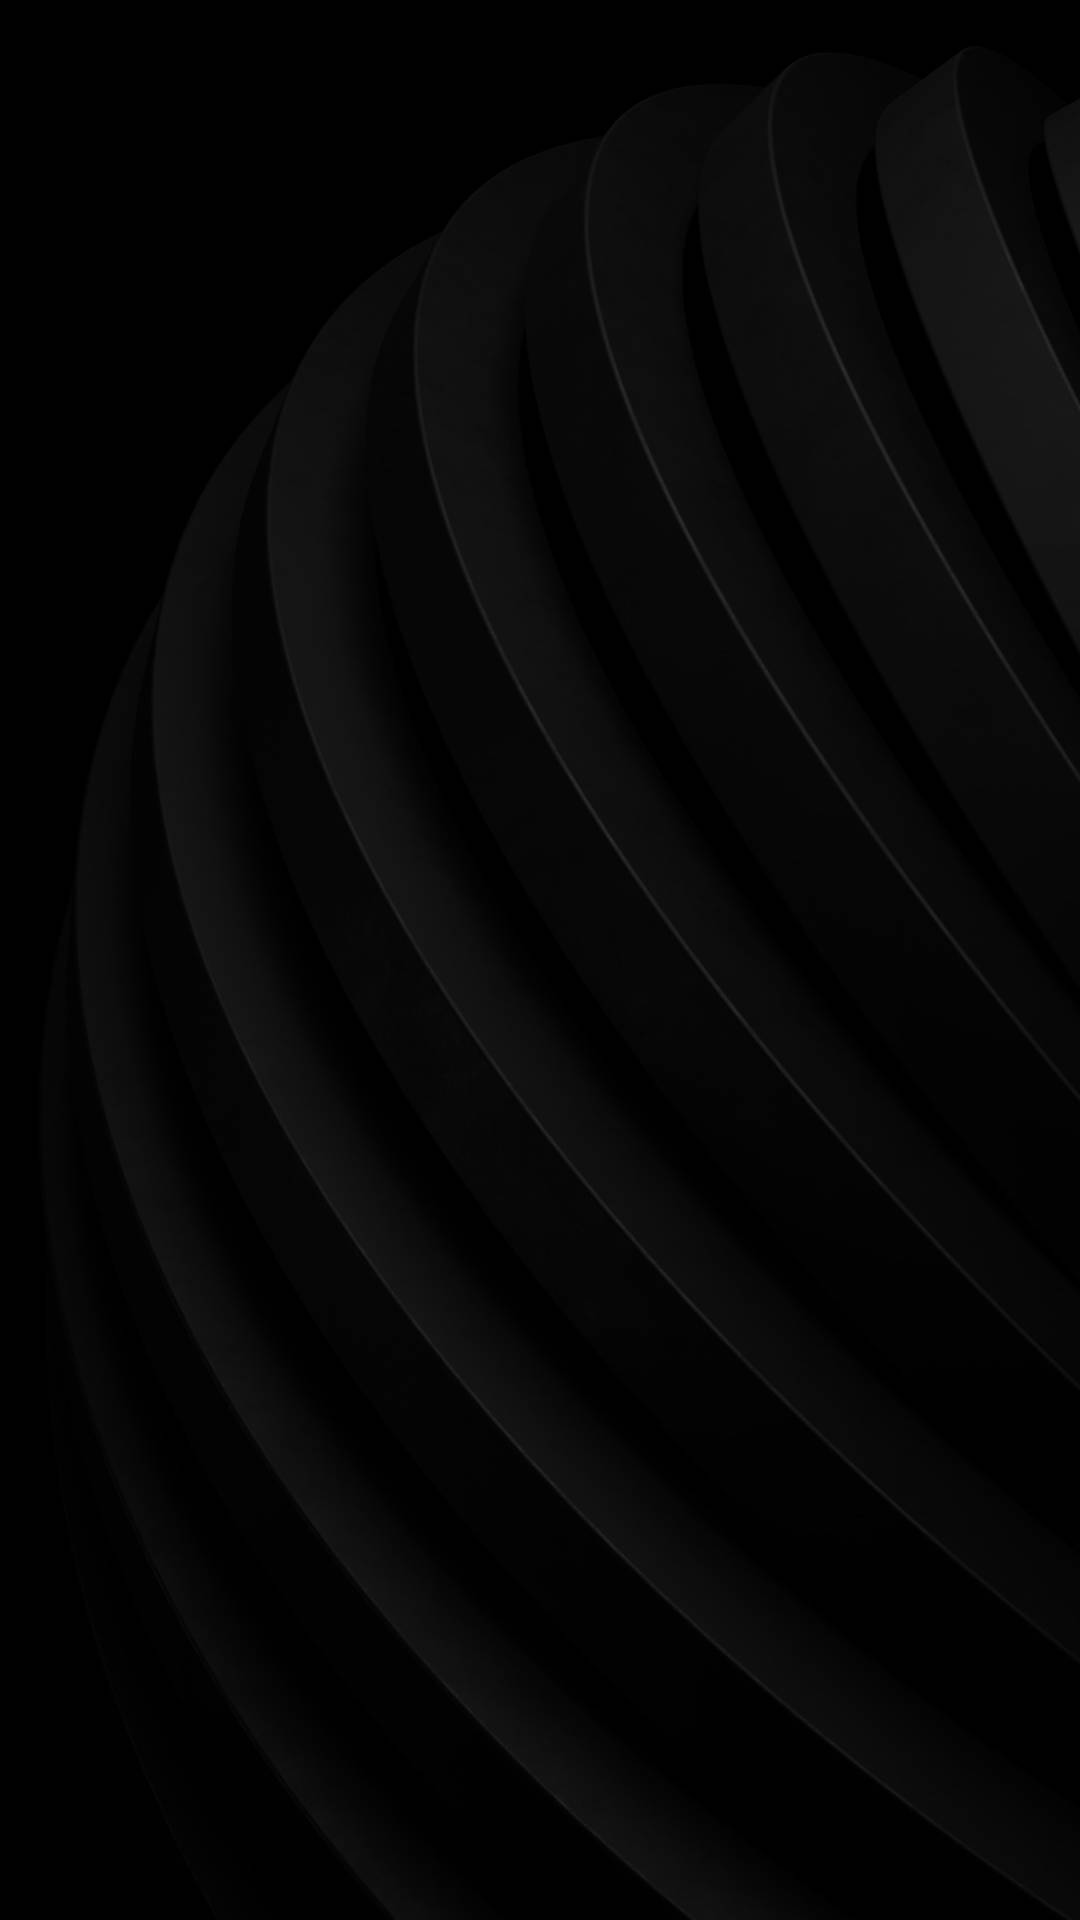 Abstract Curved Black Aesthetic Tumblr Iphone Wallpaper